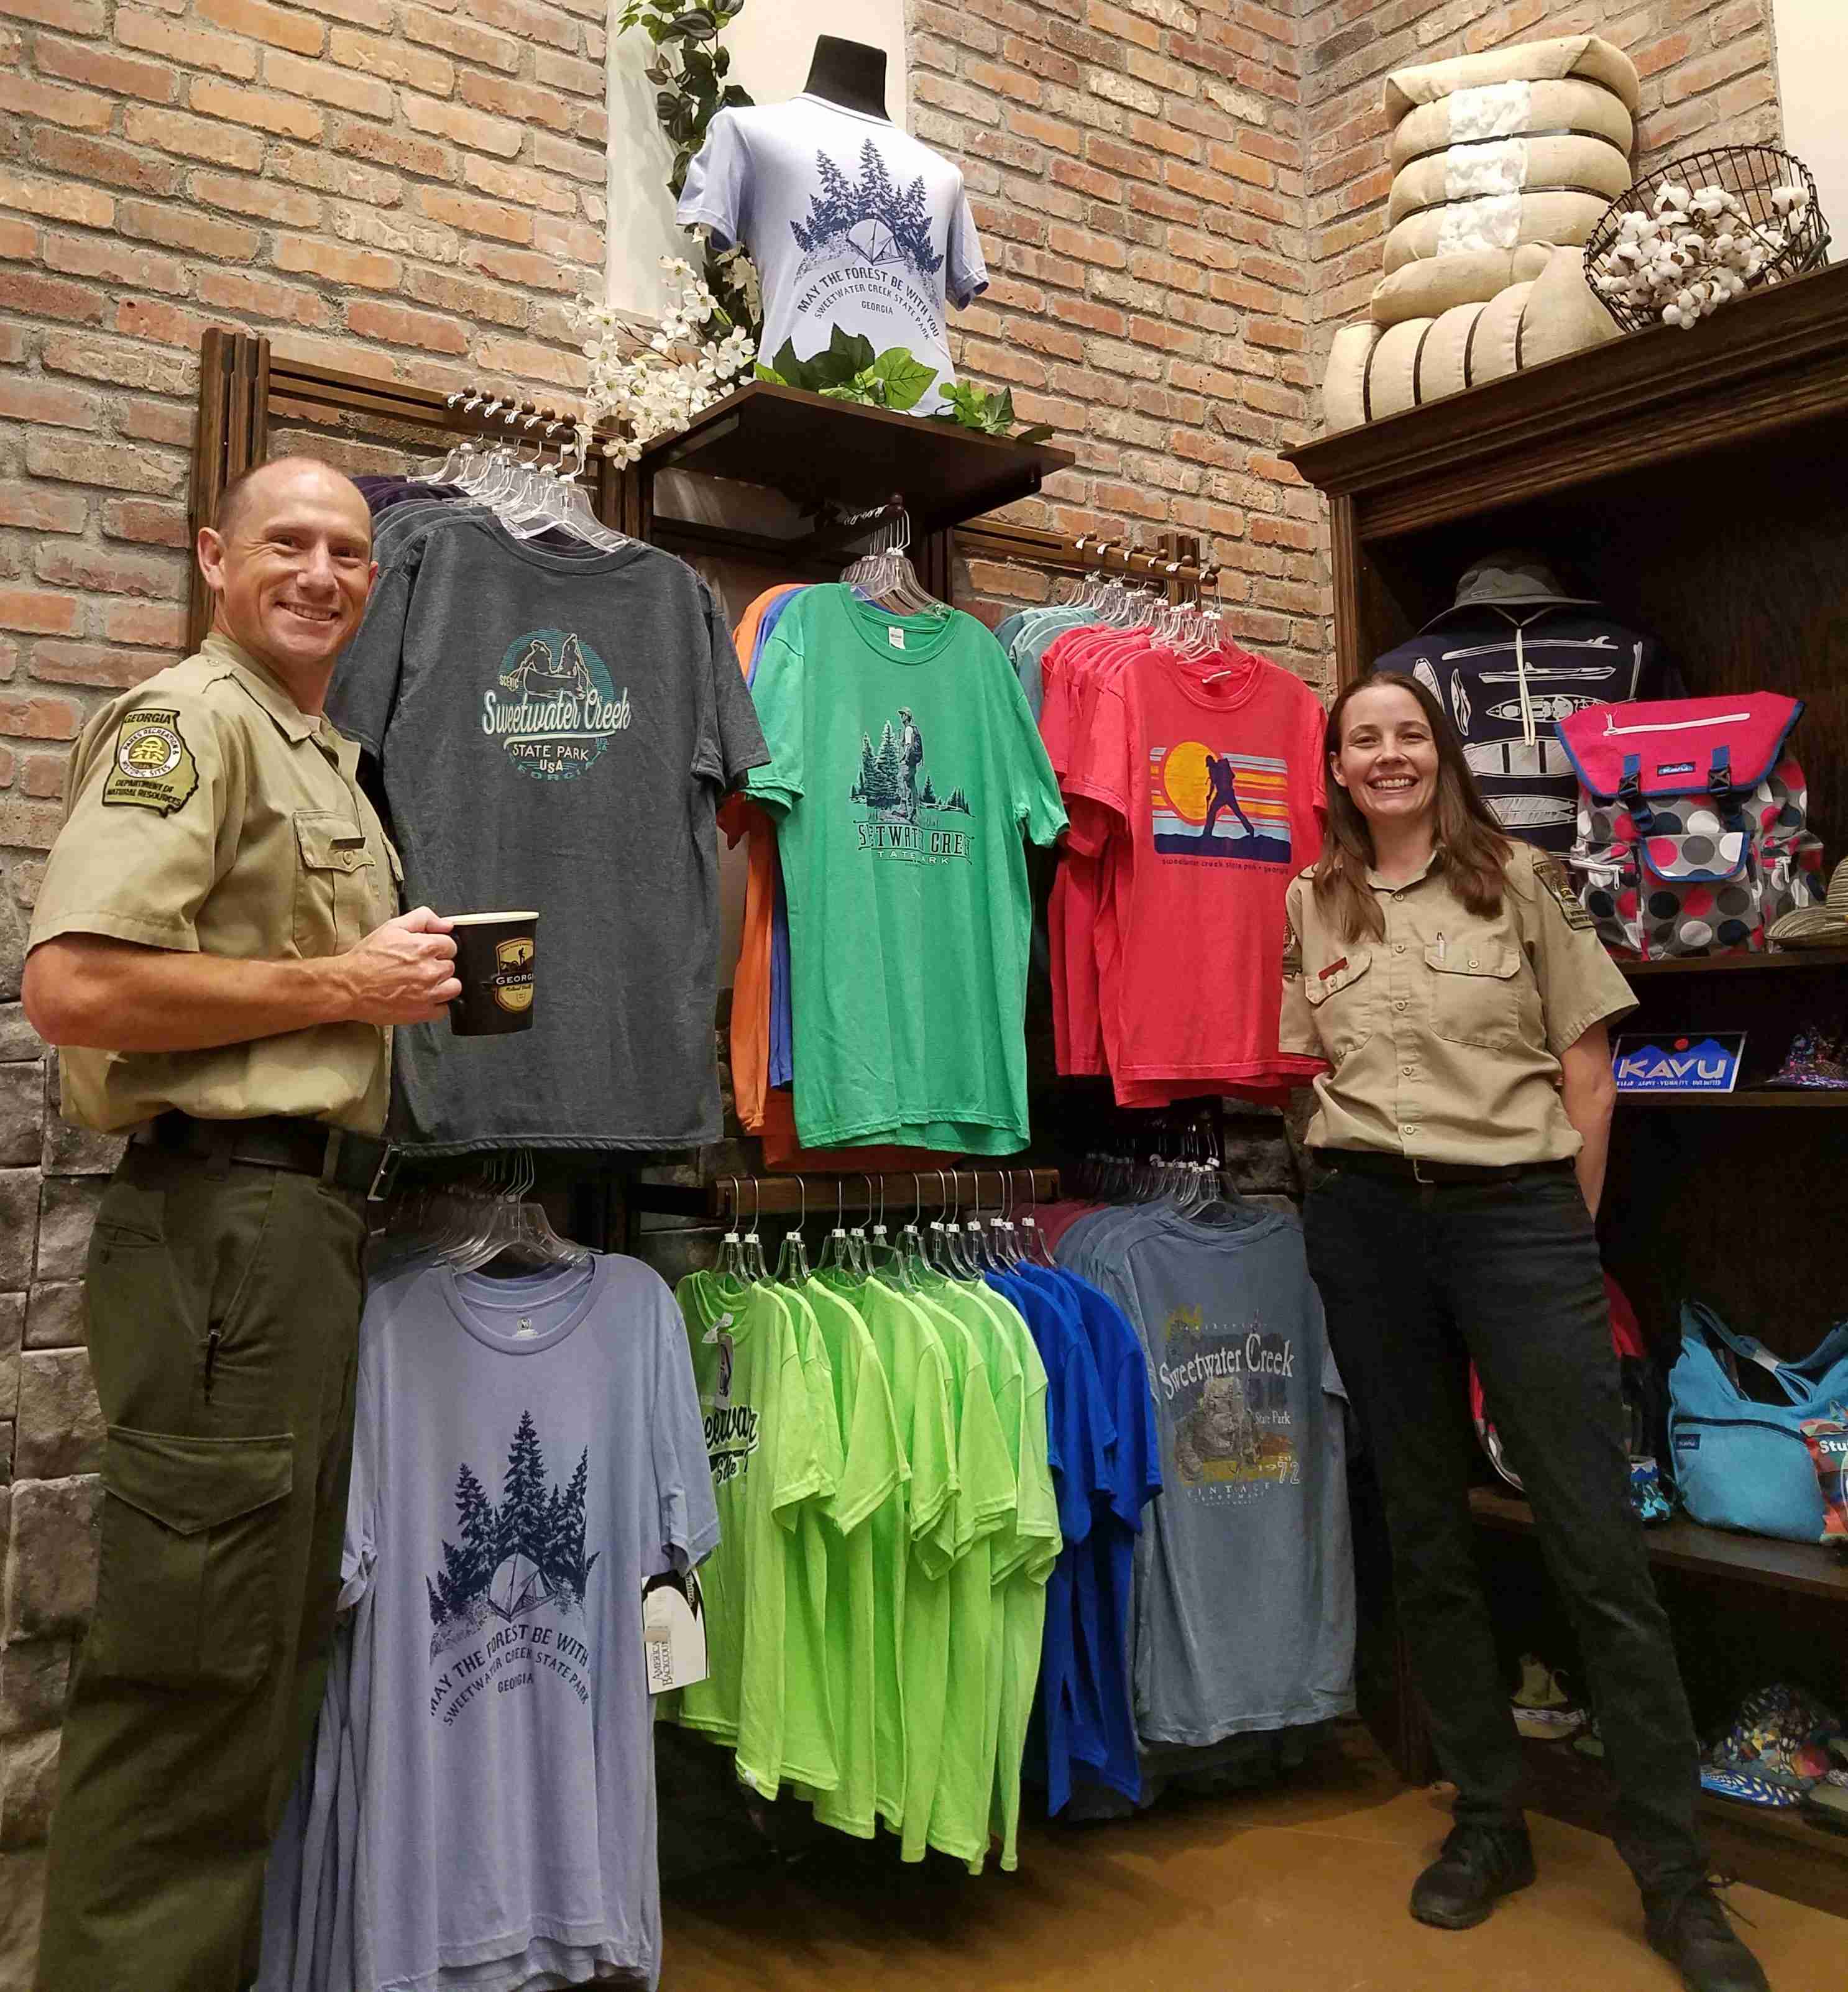 The Great Outdoors <br>Top Selling Apparel and Accessories at Caves, Caverns and Public Lands